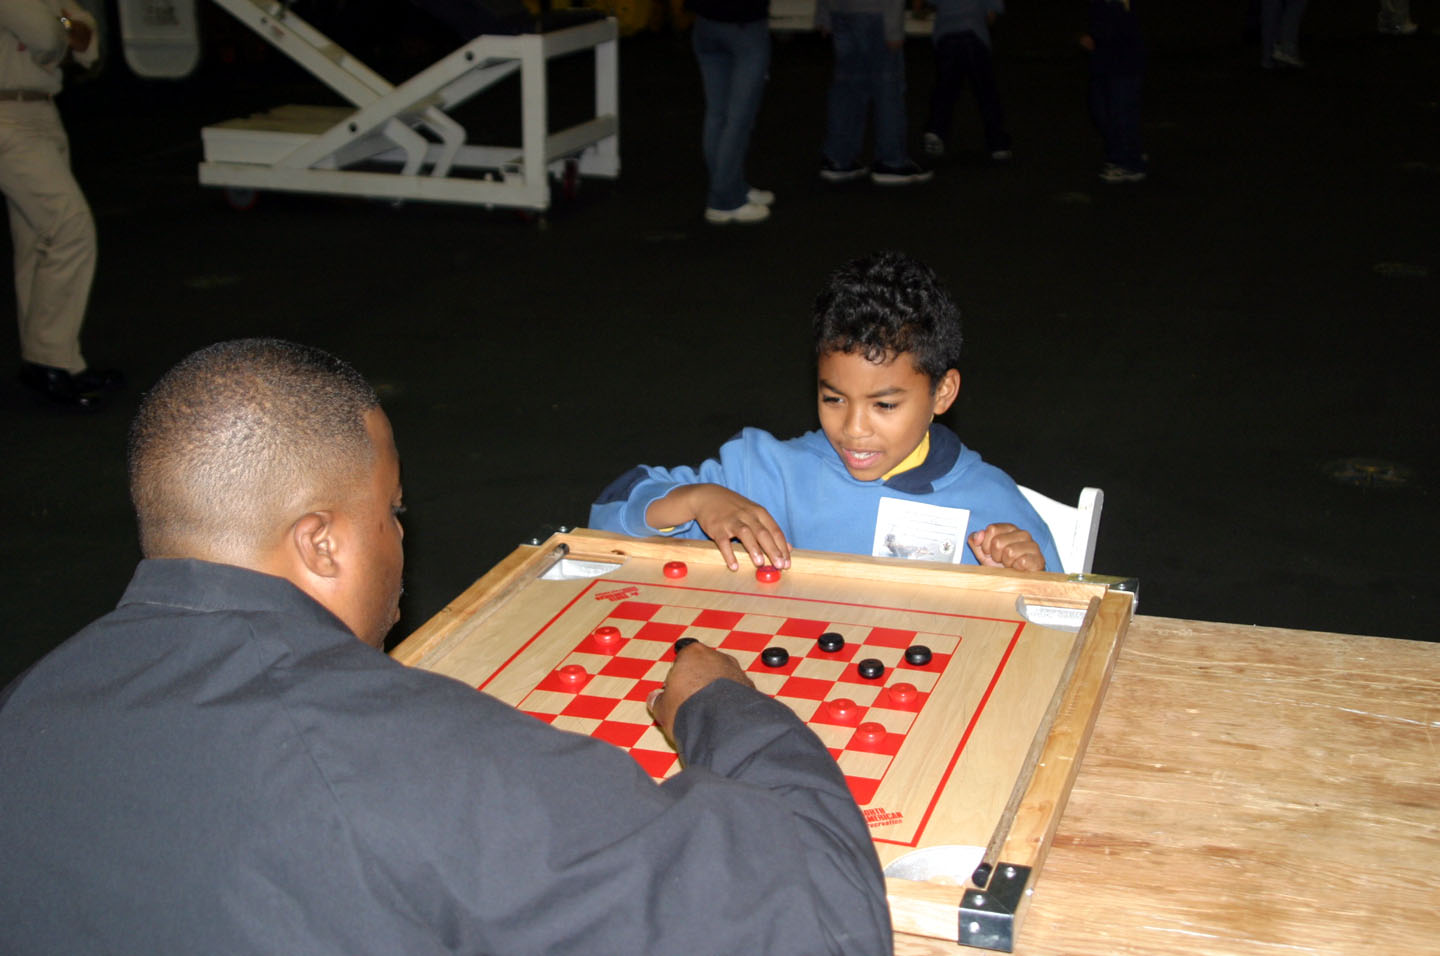 ABOARD USS CARL VINSON, At Sea in the Puget Sound -- A USS Carl Vinson (CVN 70) crew member and his son play checkers in the Hangar Bay Saturday during the "Gold Eagle" Friends and Family Day Cruise. More than 2,000 guests of the ship got a taste of underway life, complete with an air show, games and static displays of common evolutions aboard the Nimitz-class aircraft carrier. Photo by JOC(SW/AW) Eric Harrison.